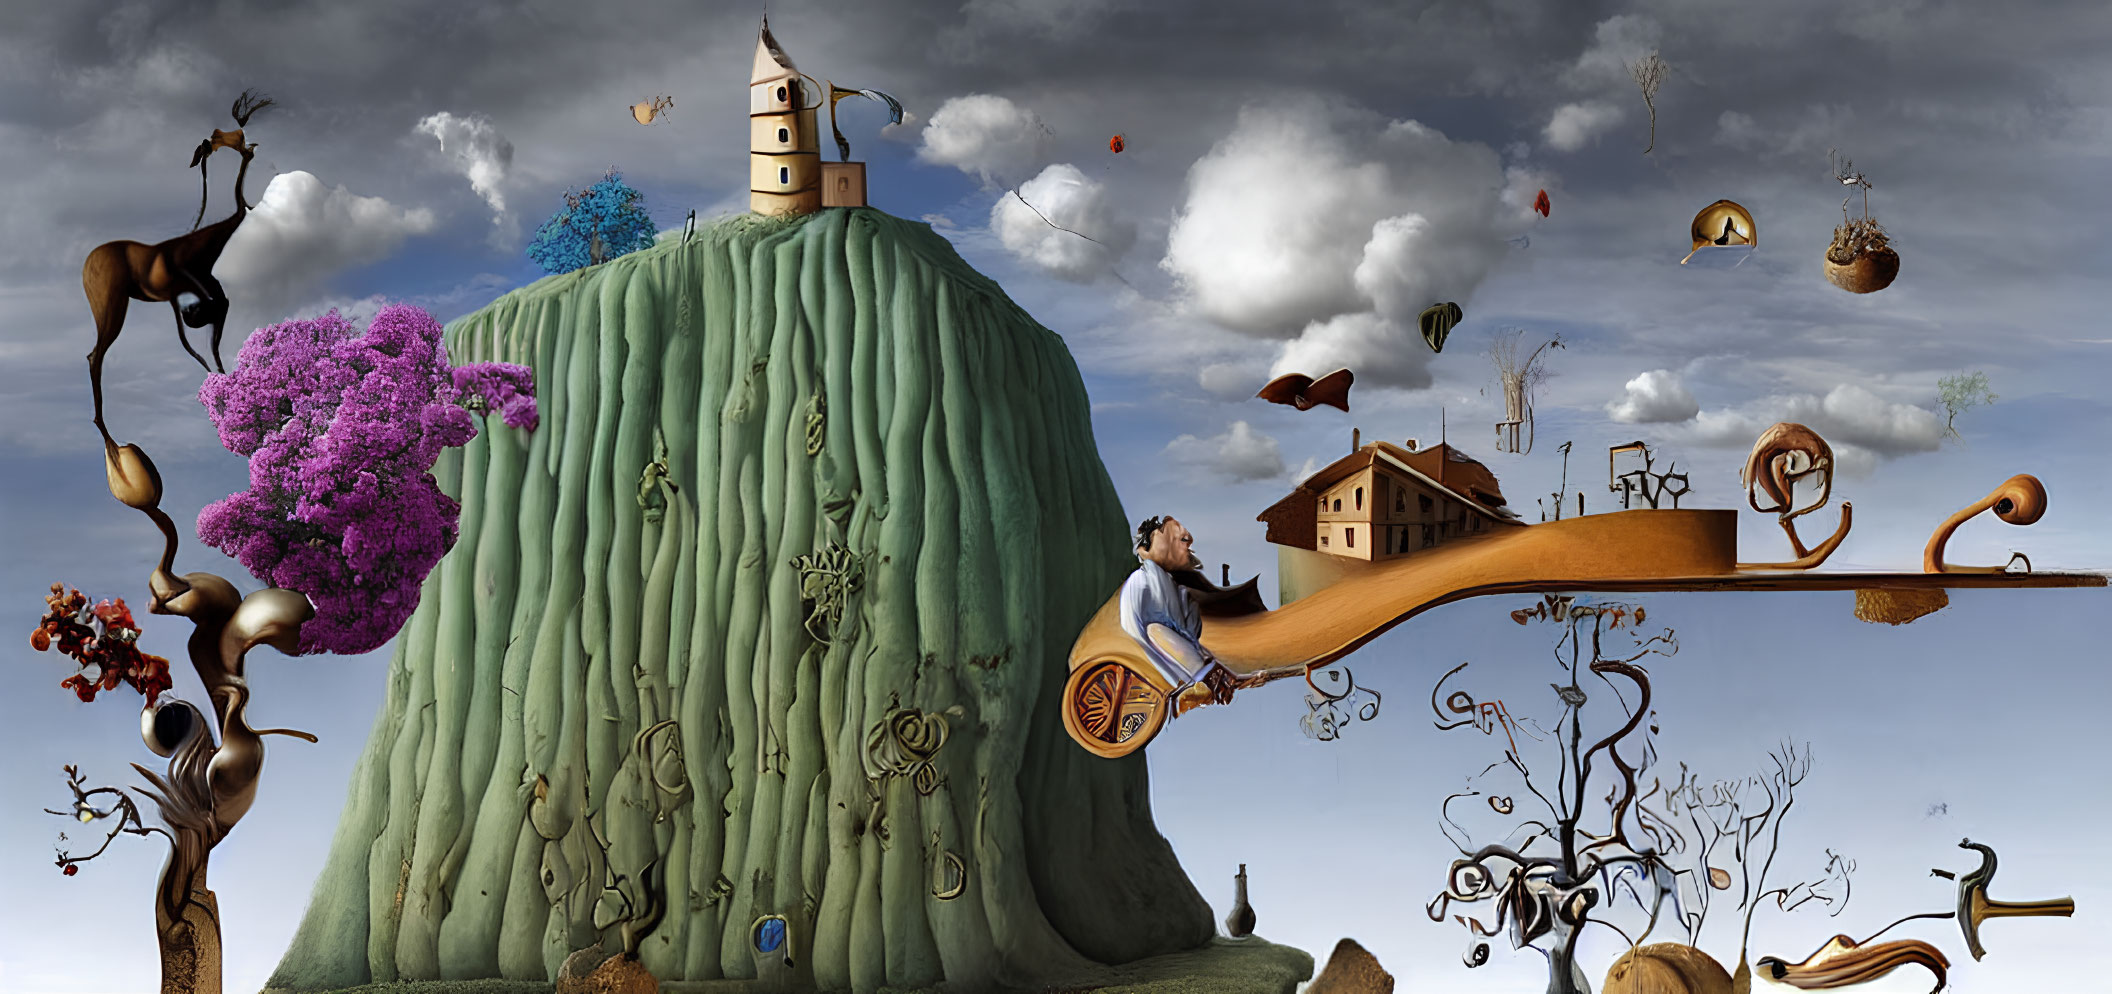 Surreal landscape with man playing violin amid musical symbols